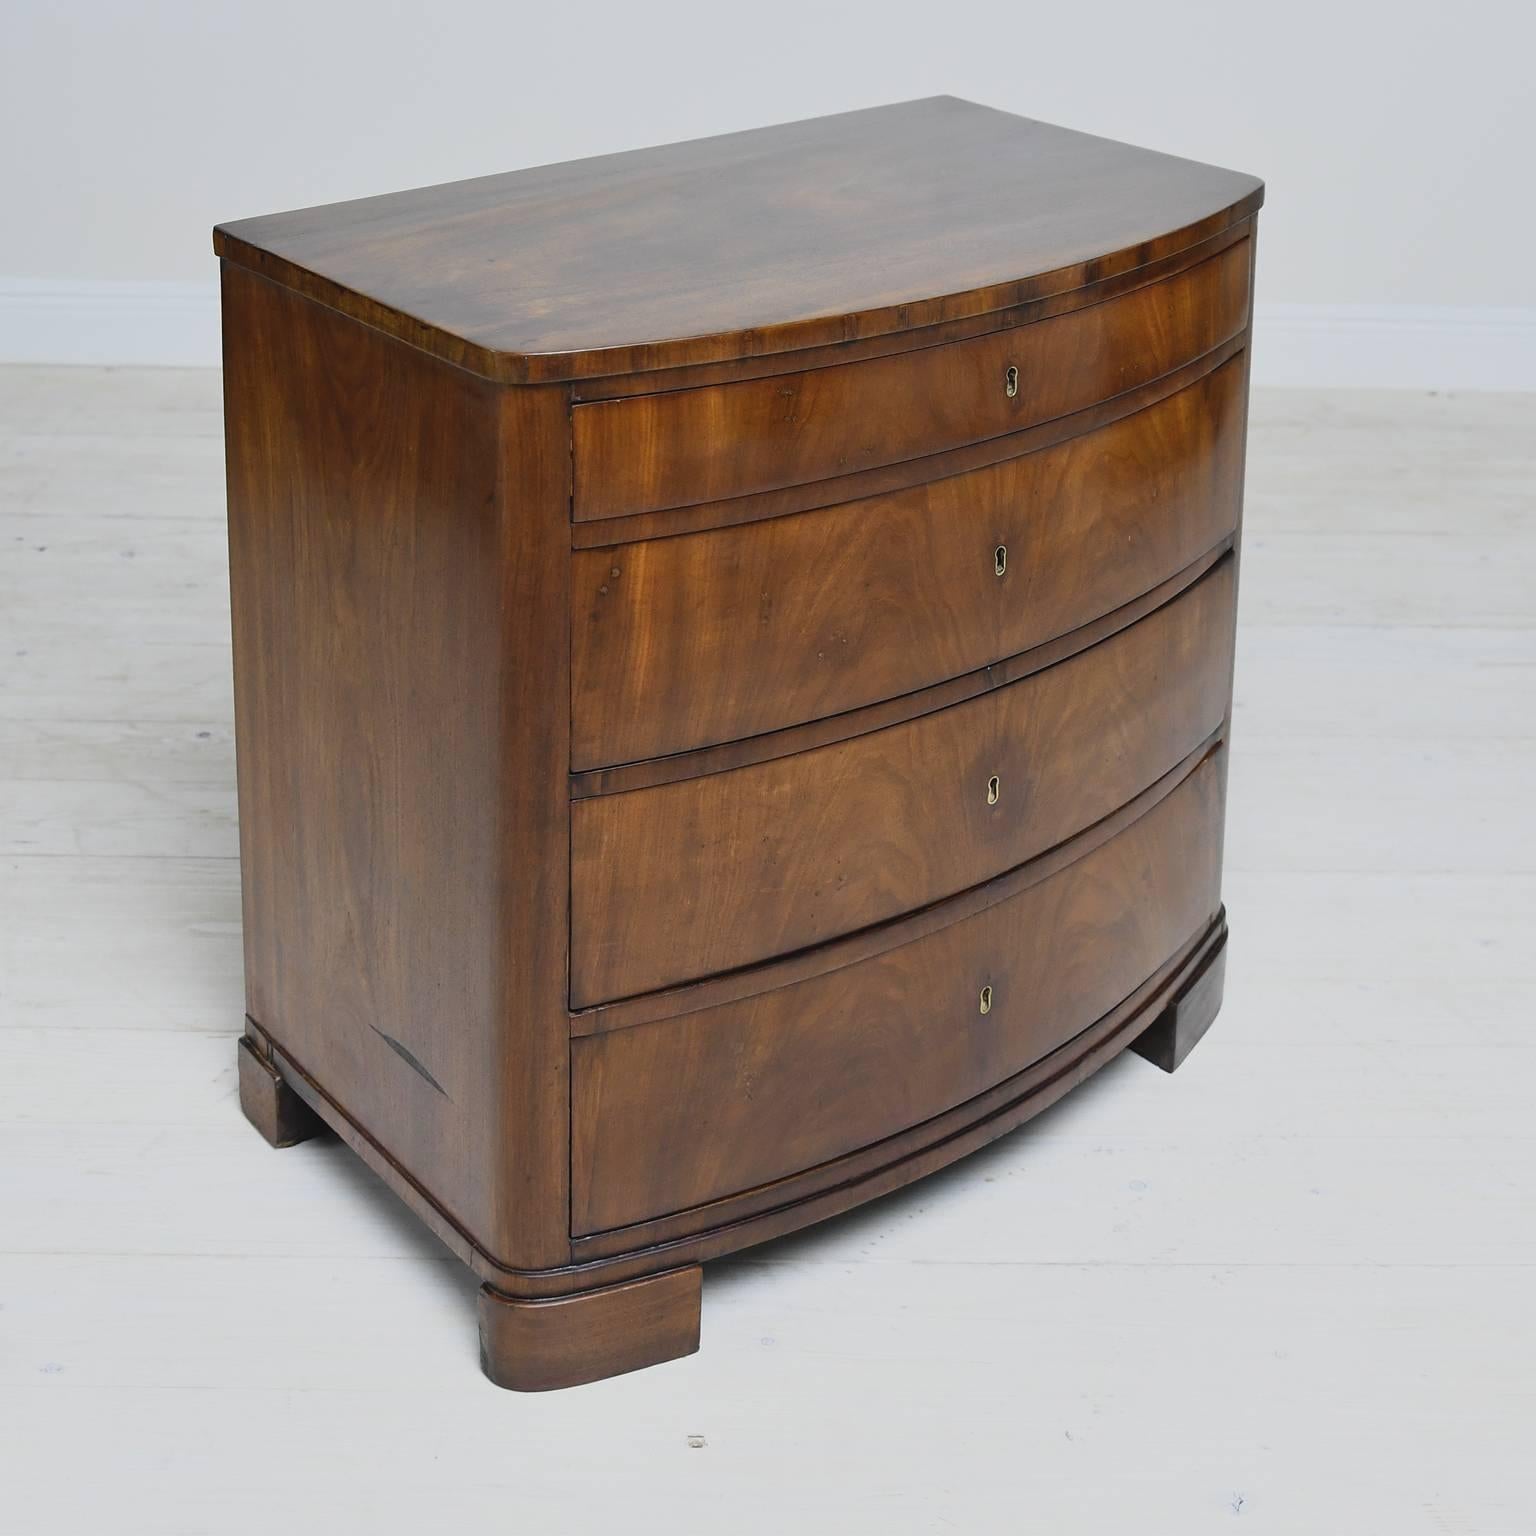 A small Biedermeier chest from during the Danish late empire period with bowed drawer fronts in bookmatched crotch mahogany offering four drawers, circa 1830. This form is unique to Denmark in terms of scale, proportions and simplicity of design. It